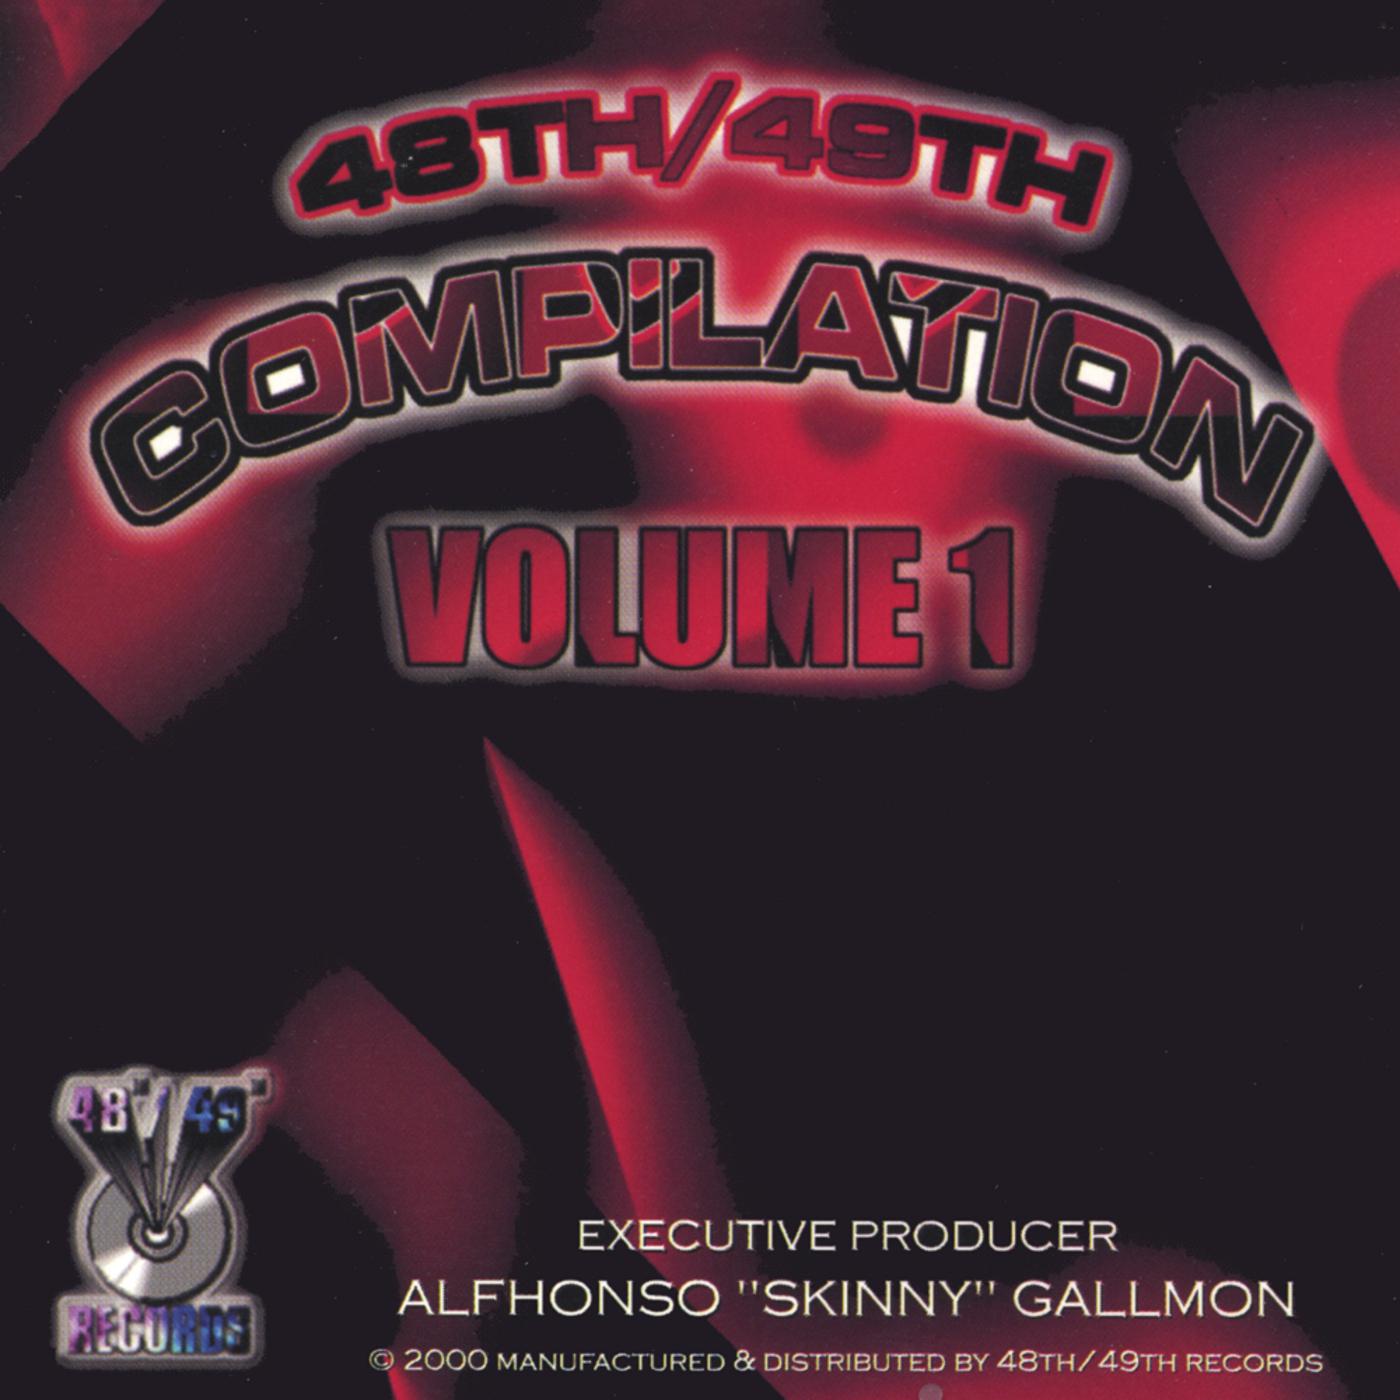 48th/49th Compilation Volume 1